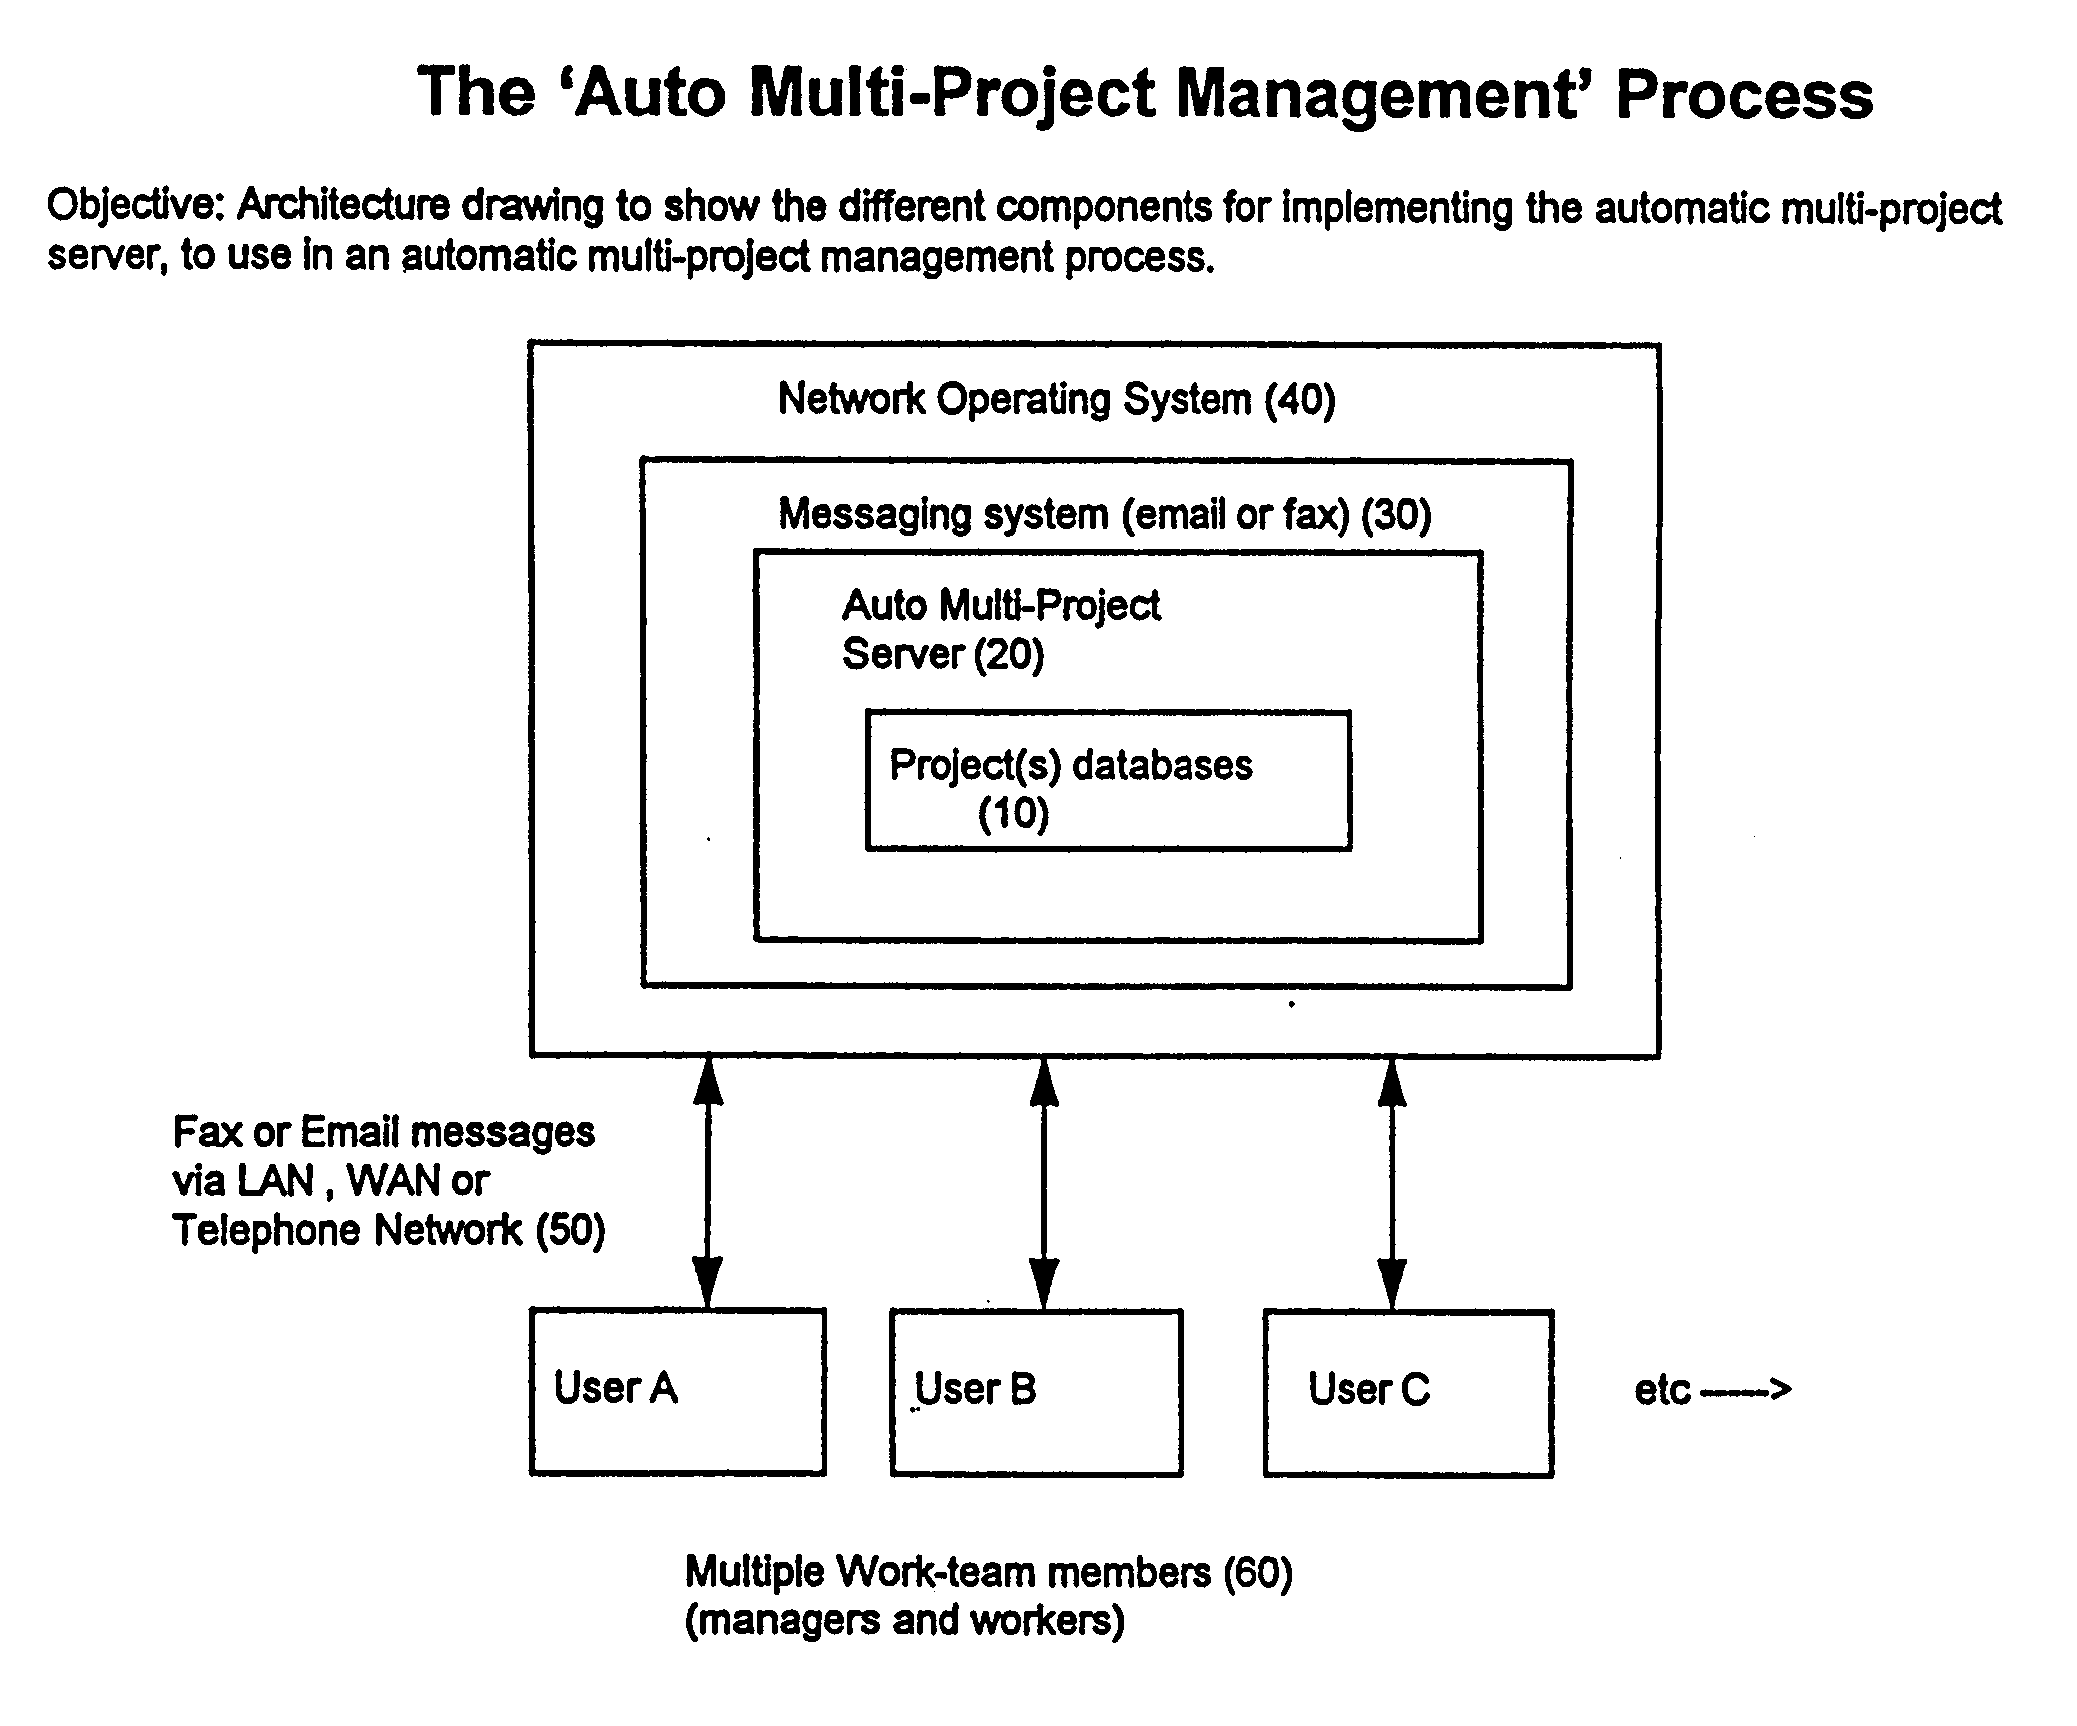 Automated, electronic network based, project management server system